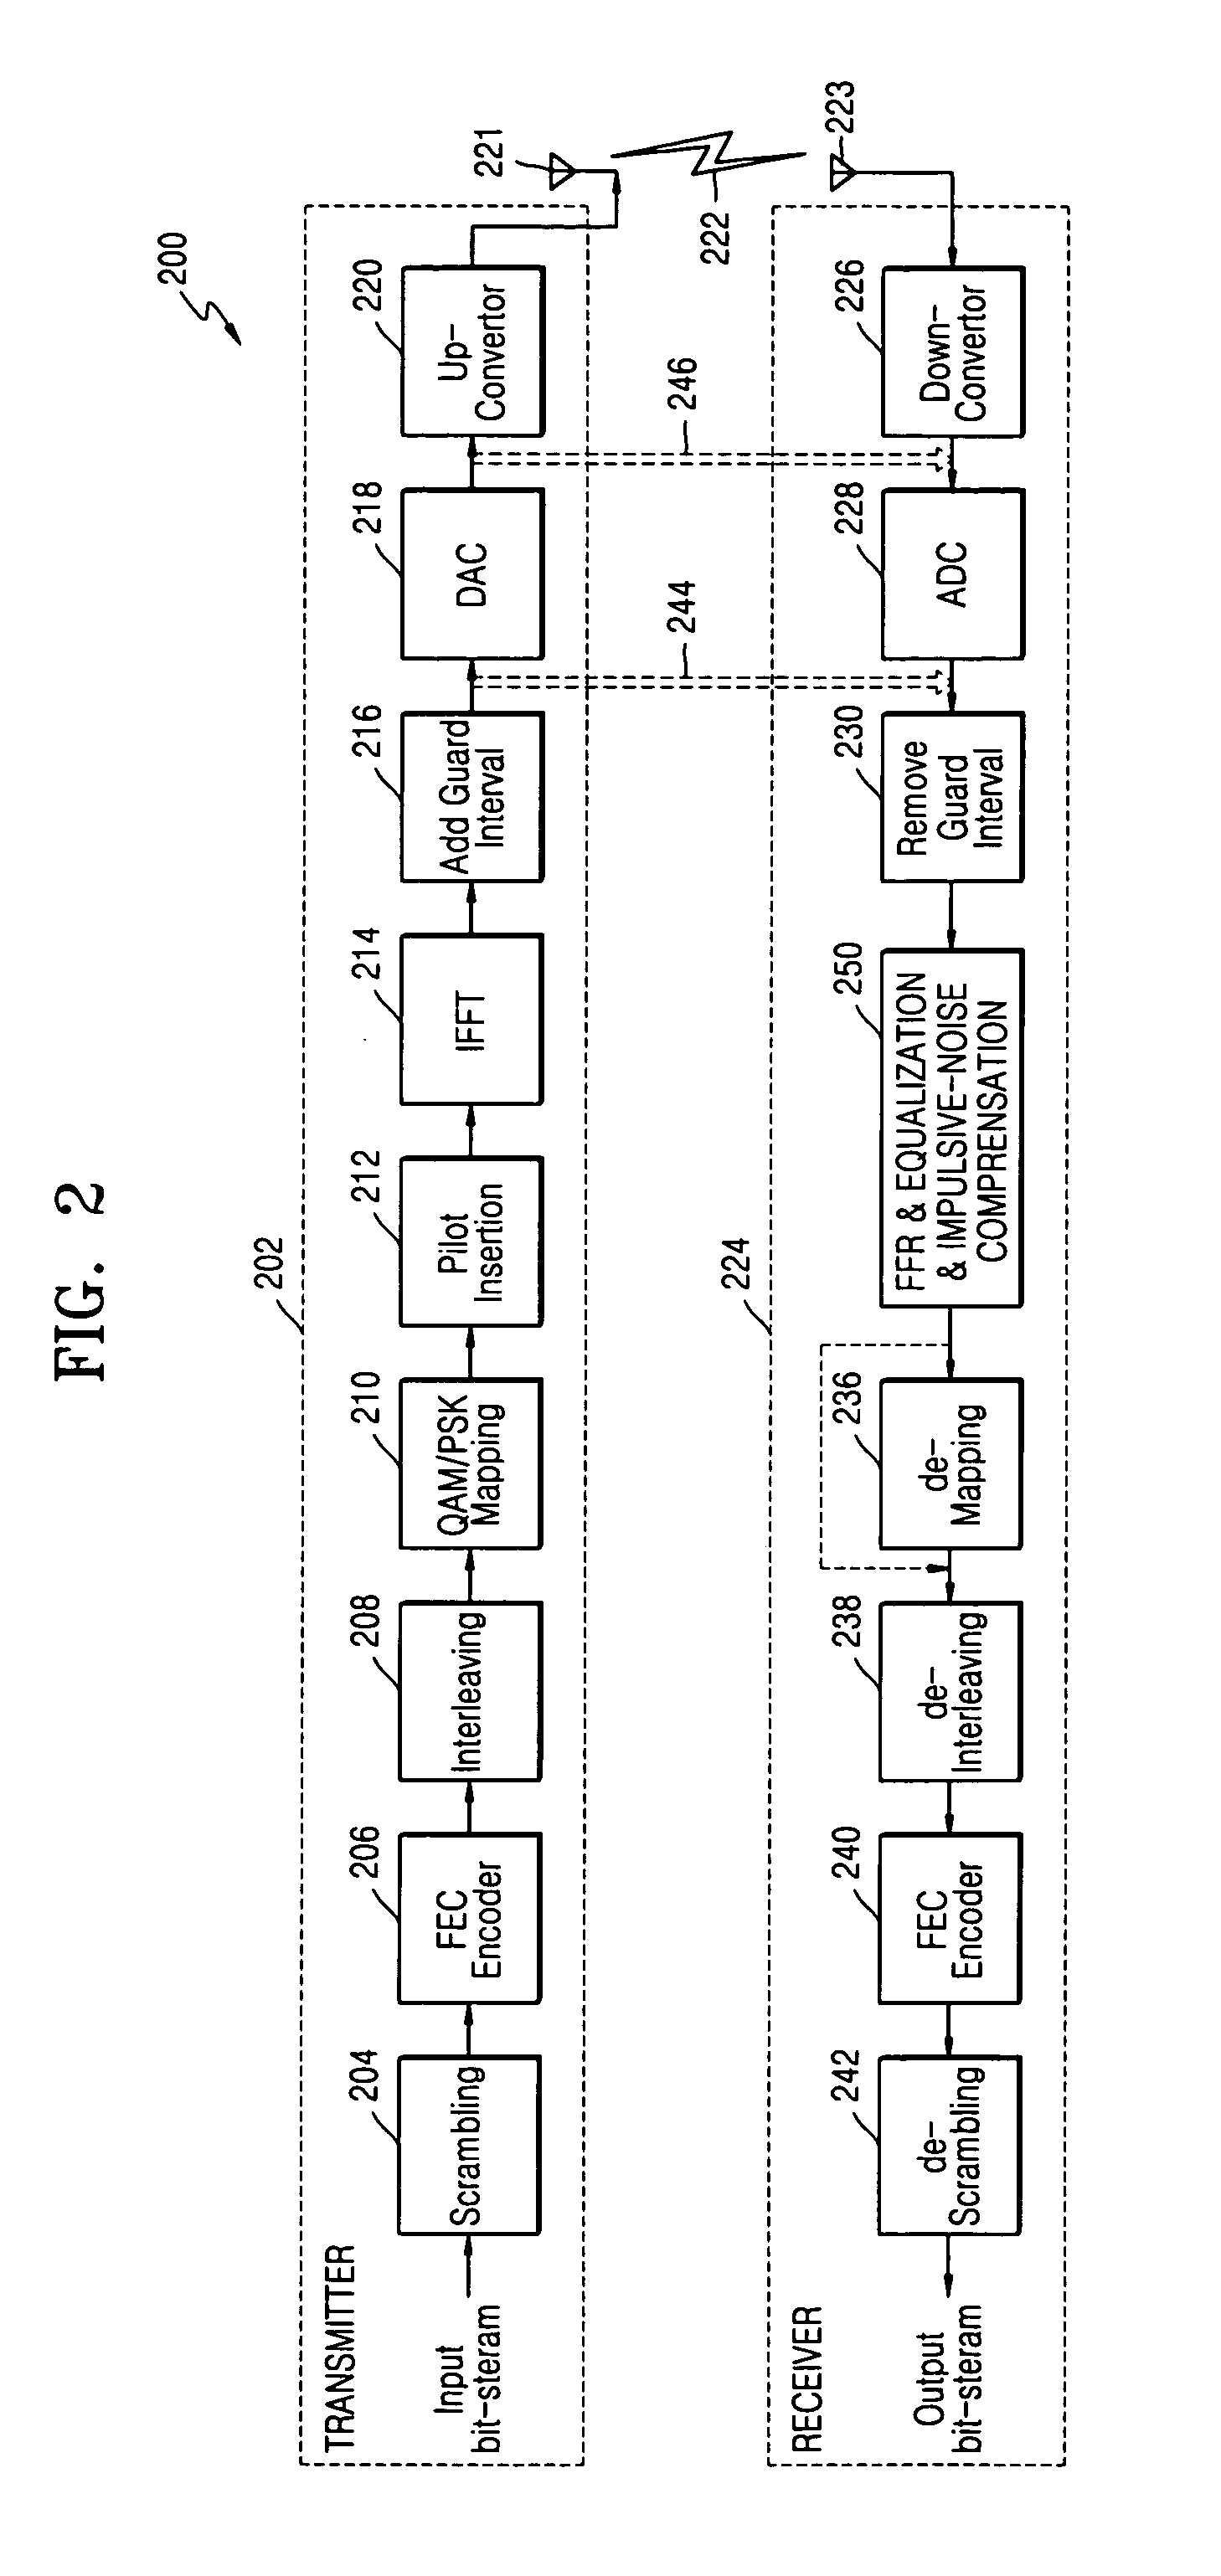 Impulse noise reduction to an MCM signal